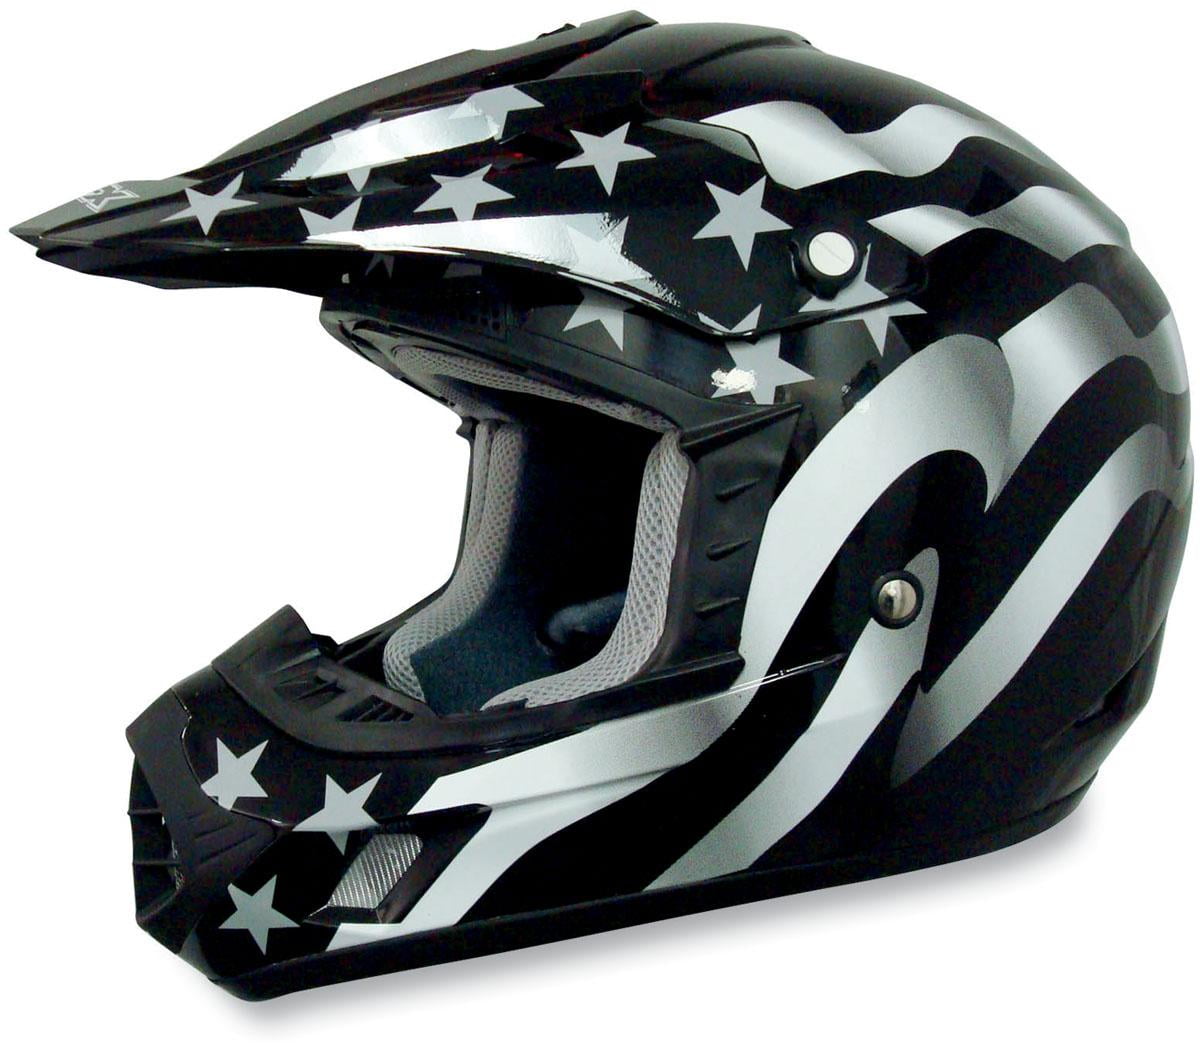 *FAST SHIPPING* AFX 17Y YOUTH SOLID MOTORCYCLE HELMET